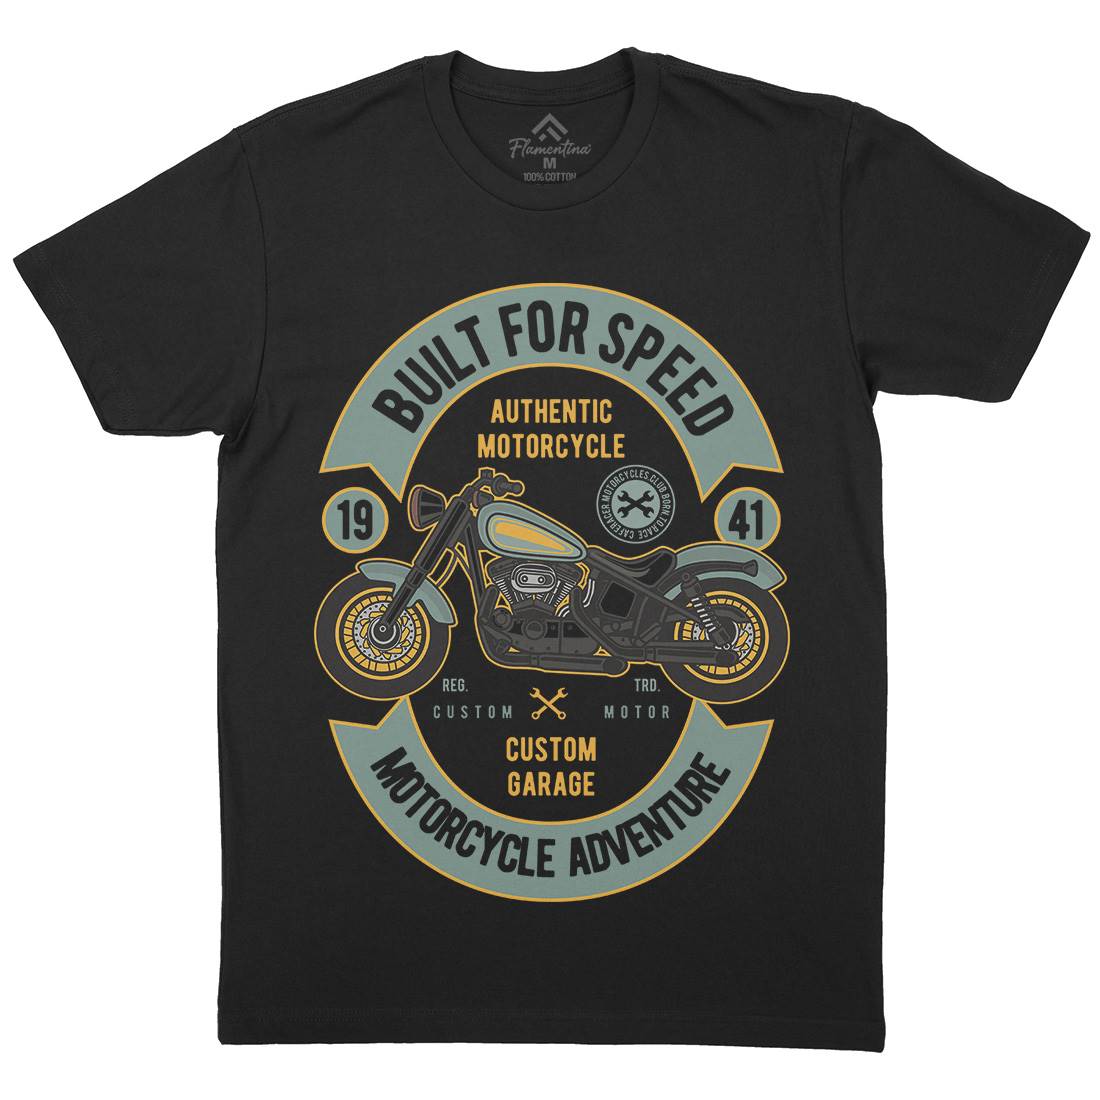 Built For Speed Mens Organic Crew Neck T-Shirt Motorcycles D512